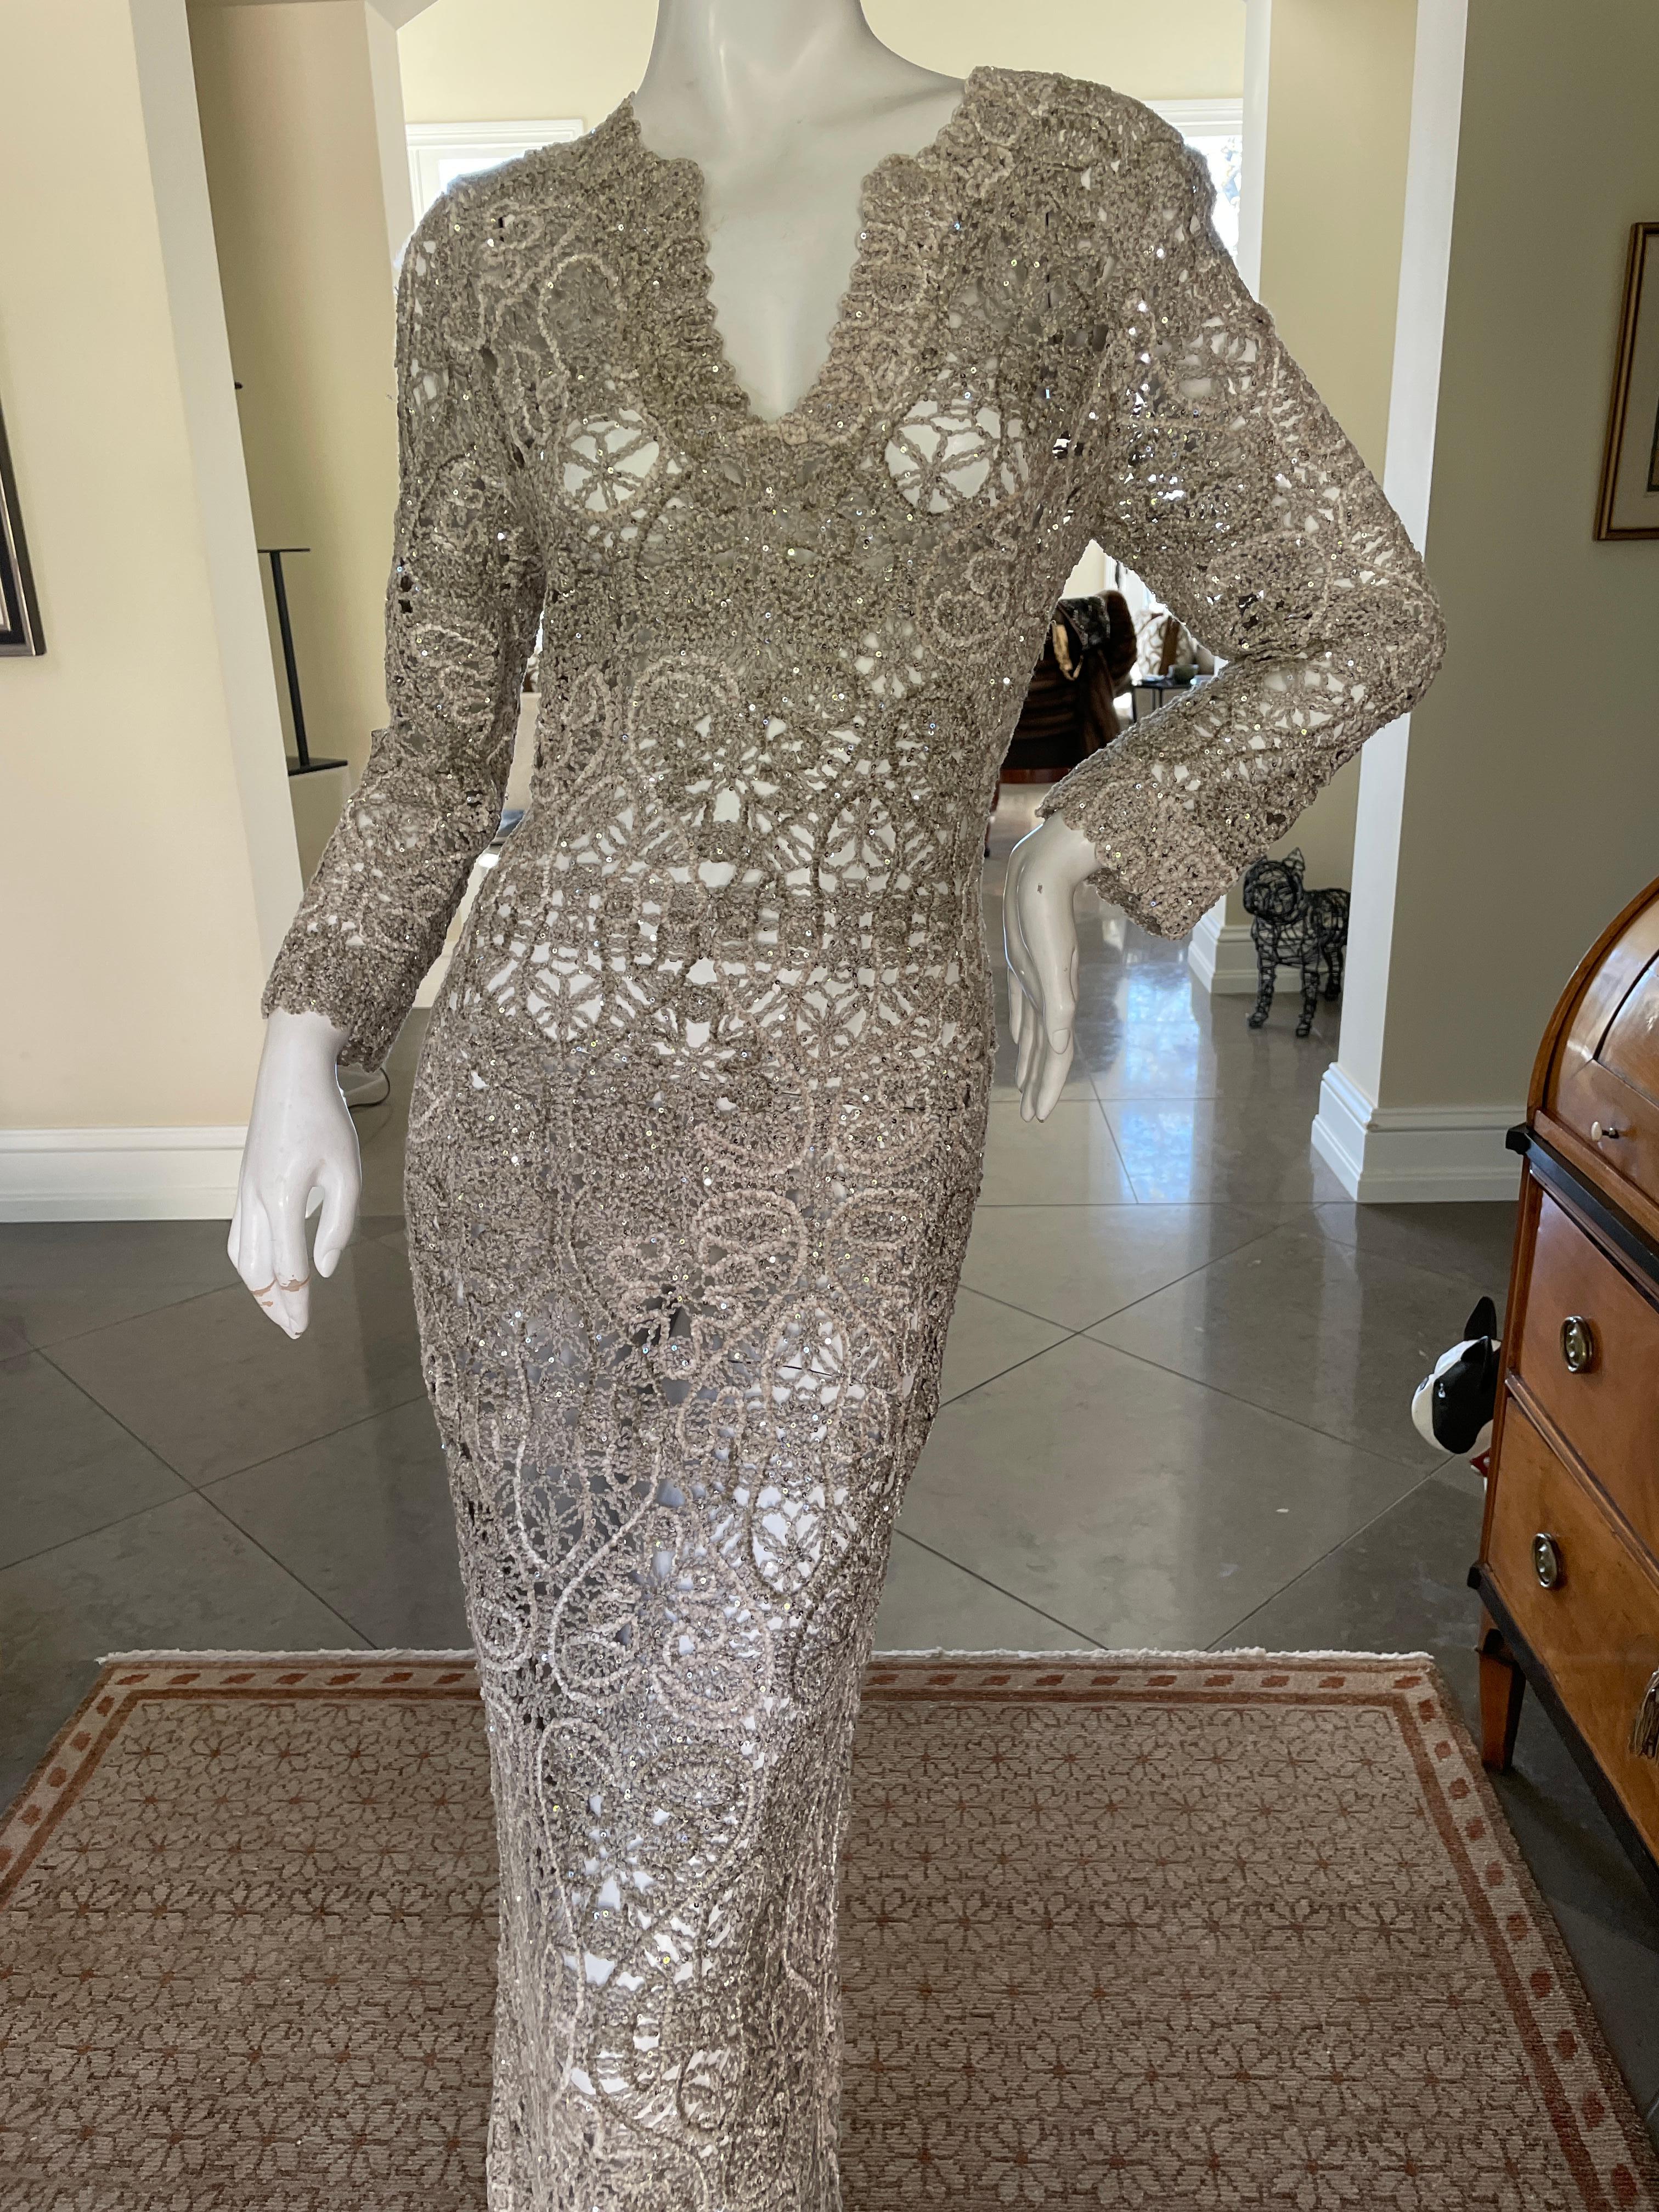 Oscar de la Renta Unusual Sheer Vintage Macrame Chenille Sequin Evening Dress
Stunning. Please use the zoom feature to see all the remarkable details. 
Created of macrame chenille with sequins throughout, it's rather amazing technically.
Appx Size